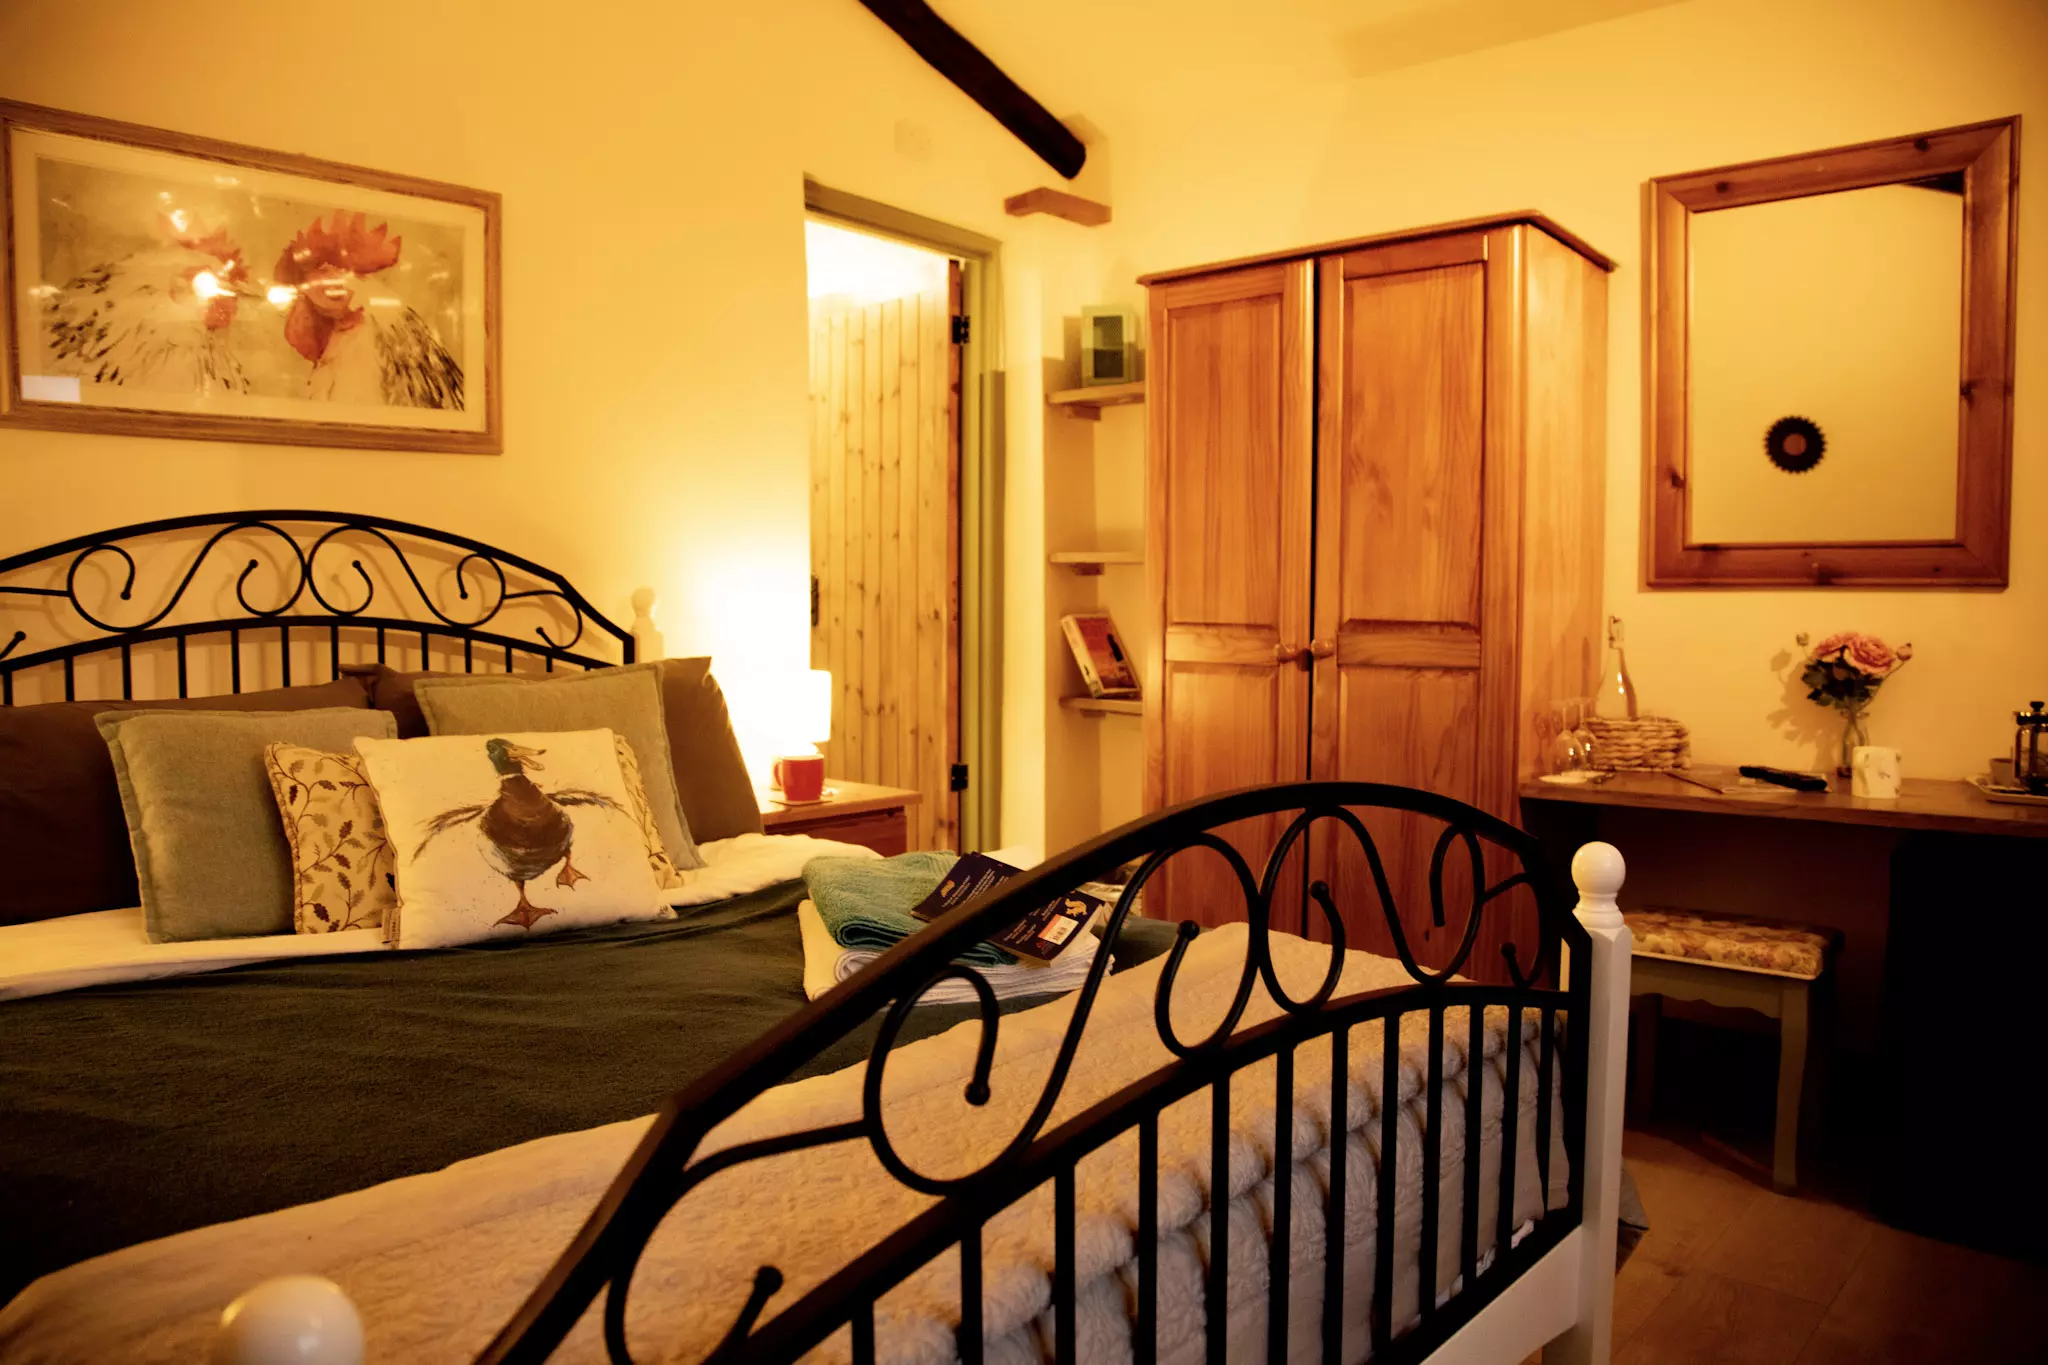 SANDRINGHAM STAY IN GUEST HOUSE: THE ROOST